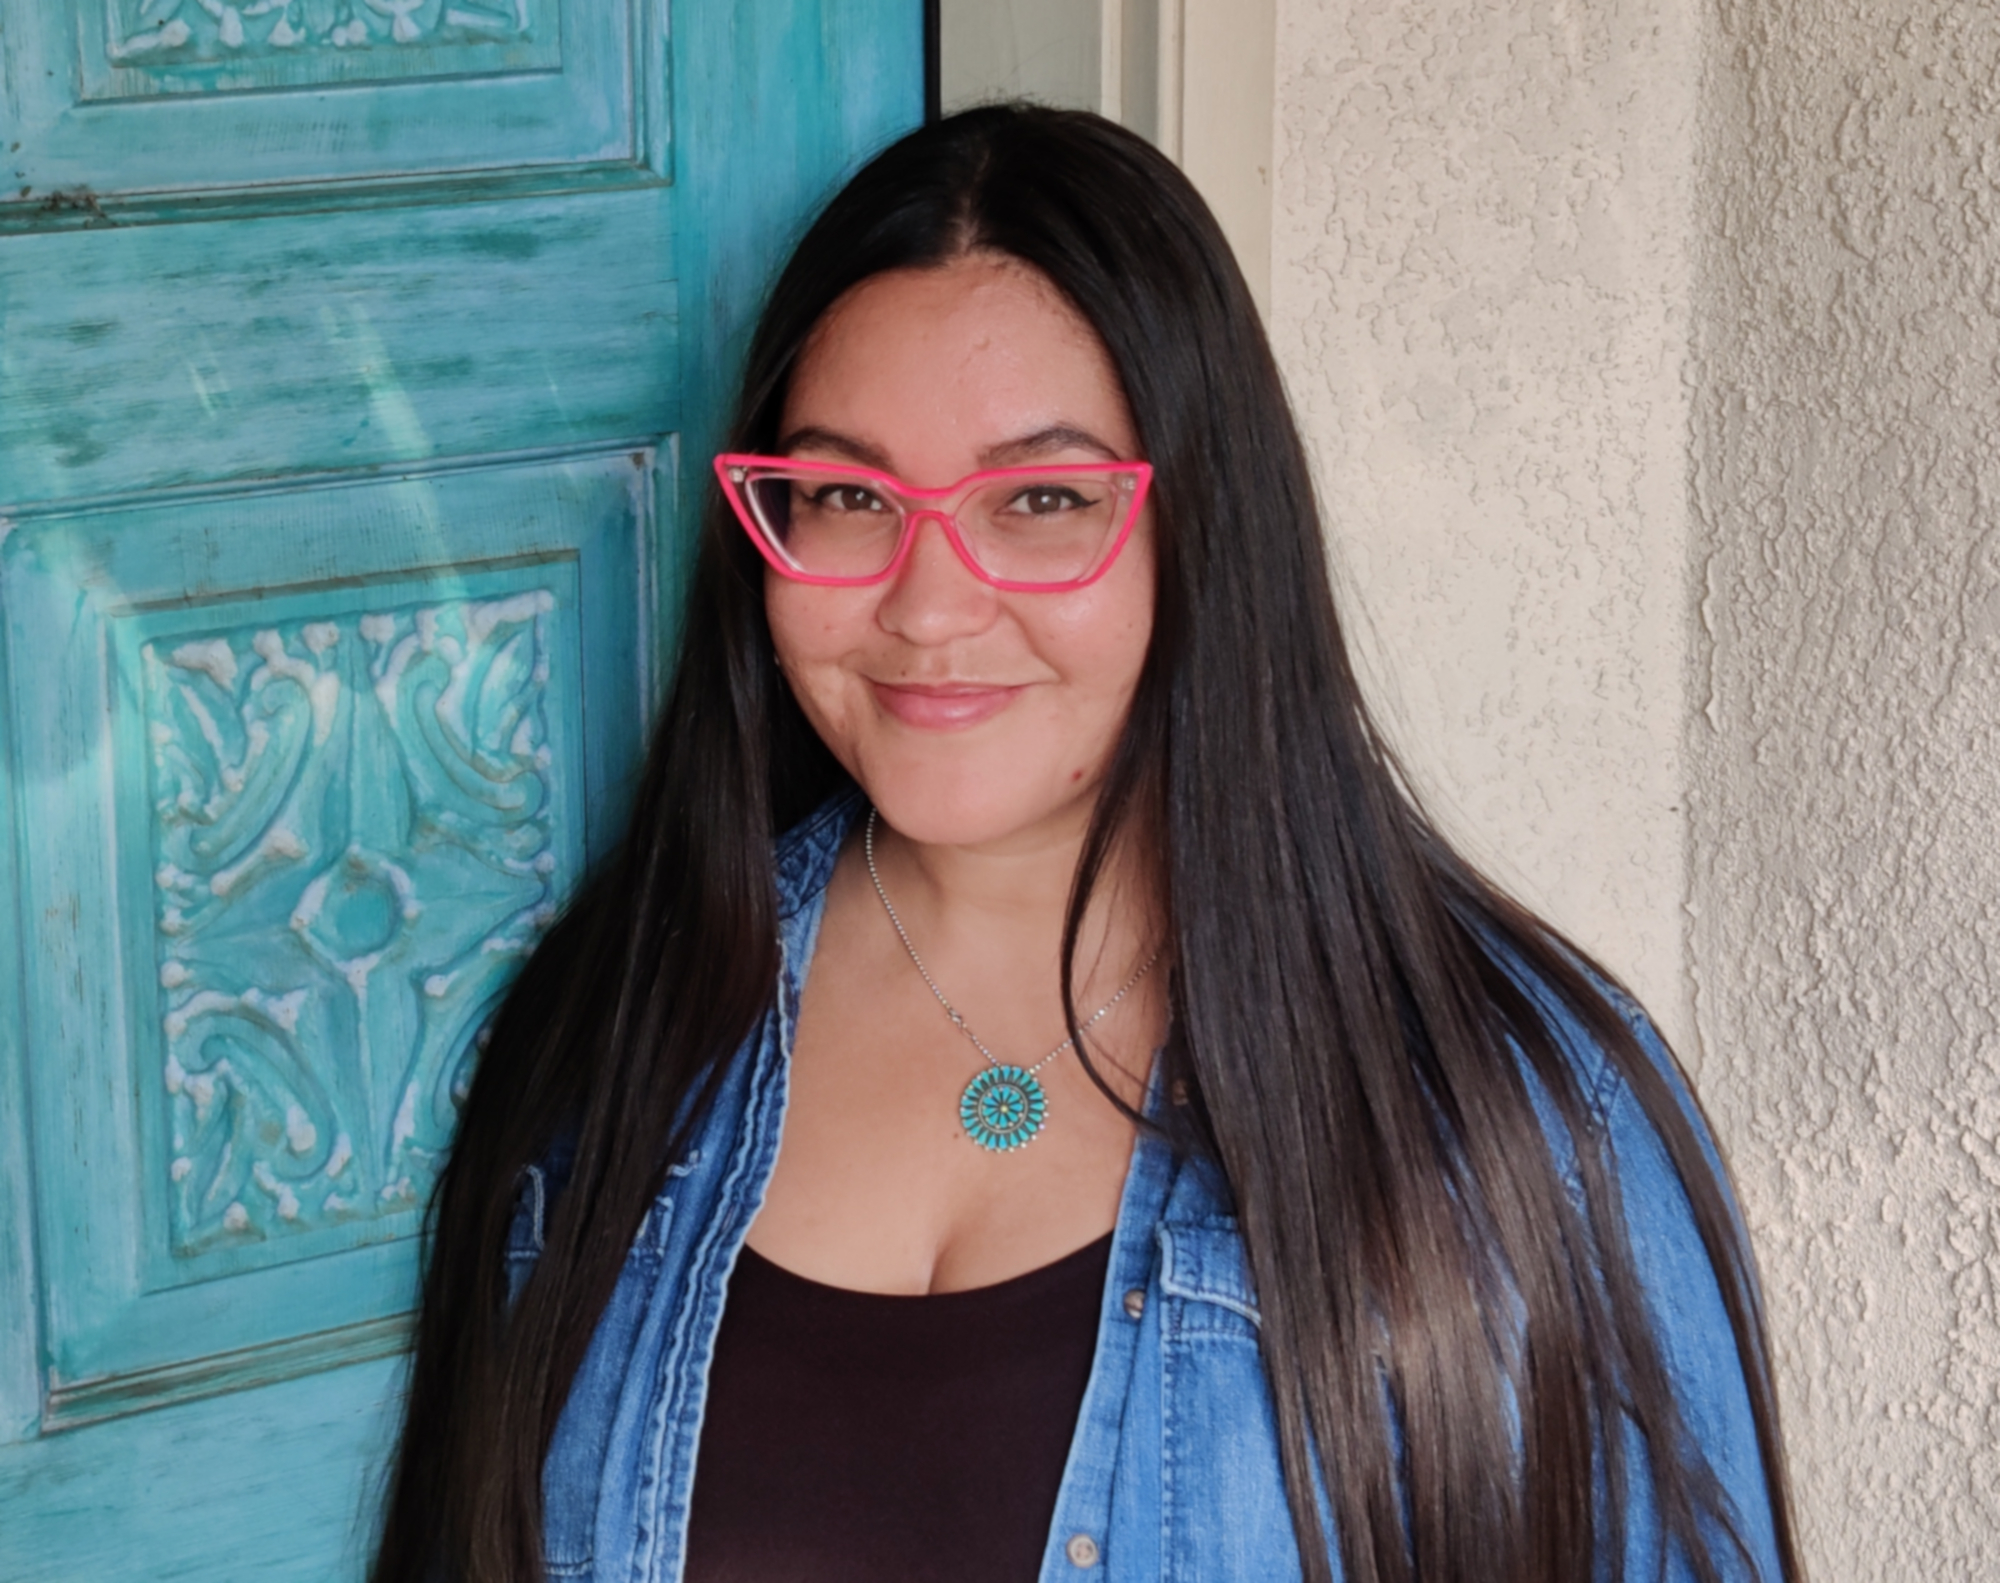 Woman with long, dark hair wearing hot pink cat eye glasses and a black top under a denim shirt, standing in front of a carved turquoise painted door and stucco wall.